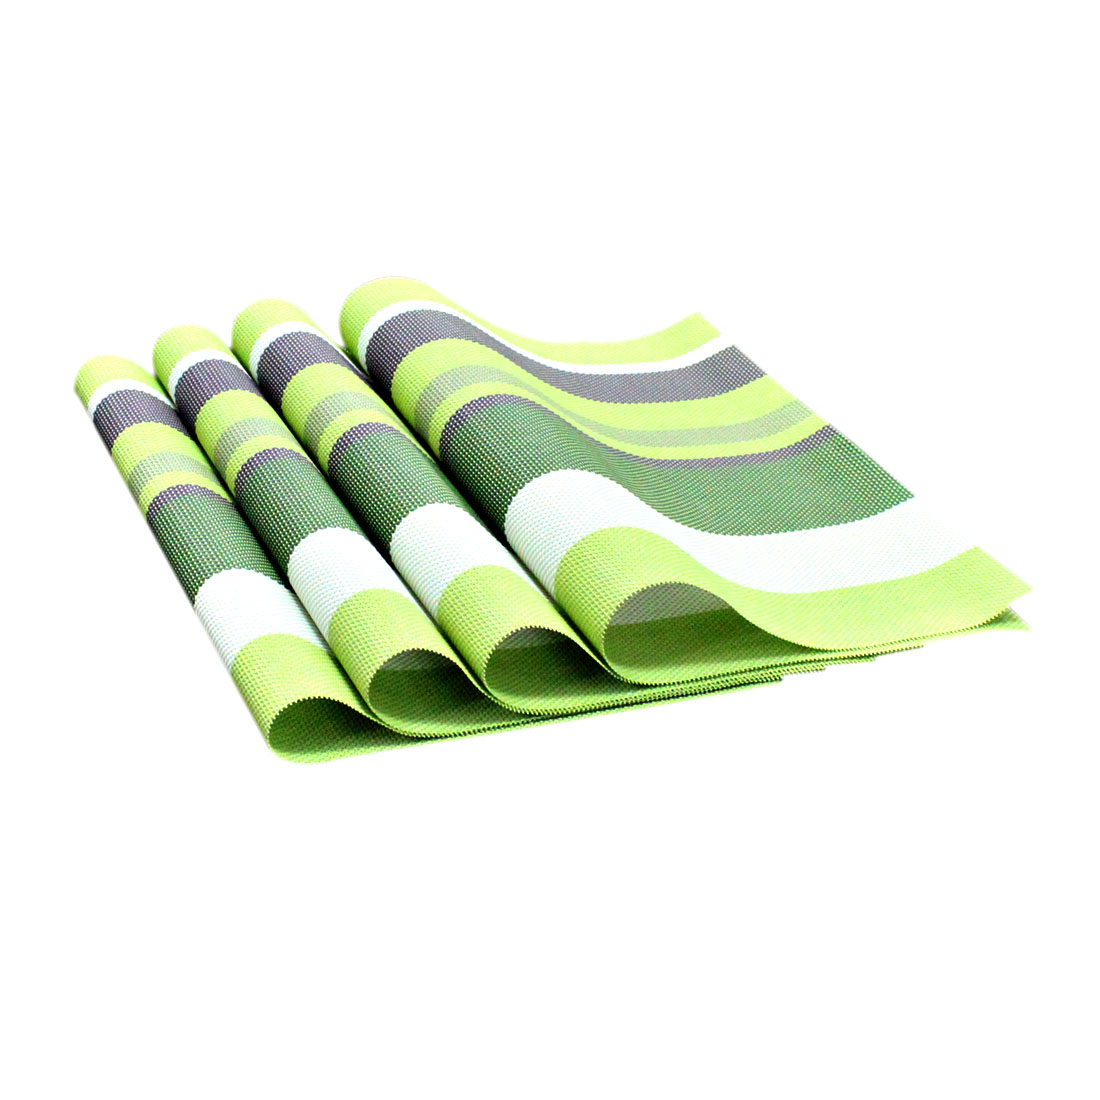 ORKA PVC Dining Table Placemat 4-Piece Set - Yelllow  